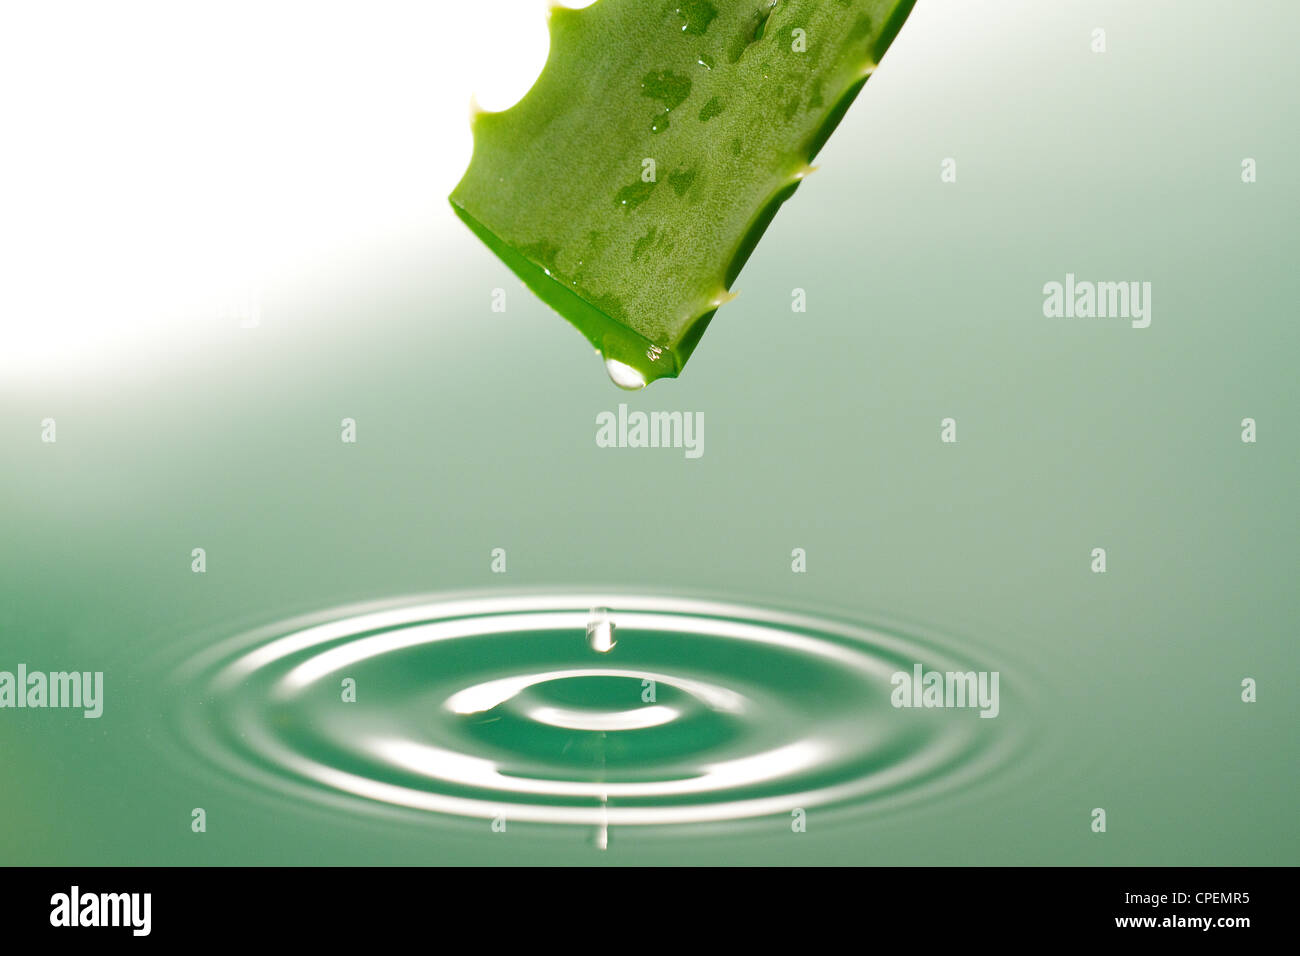 Gel Drop Dropping From Aloe Vera Leaf Stock Photo